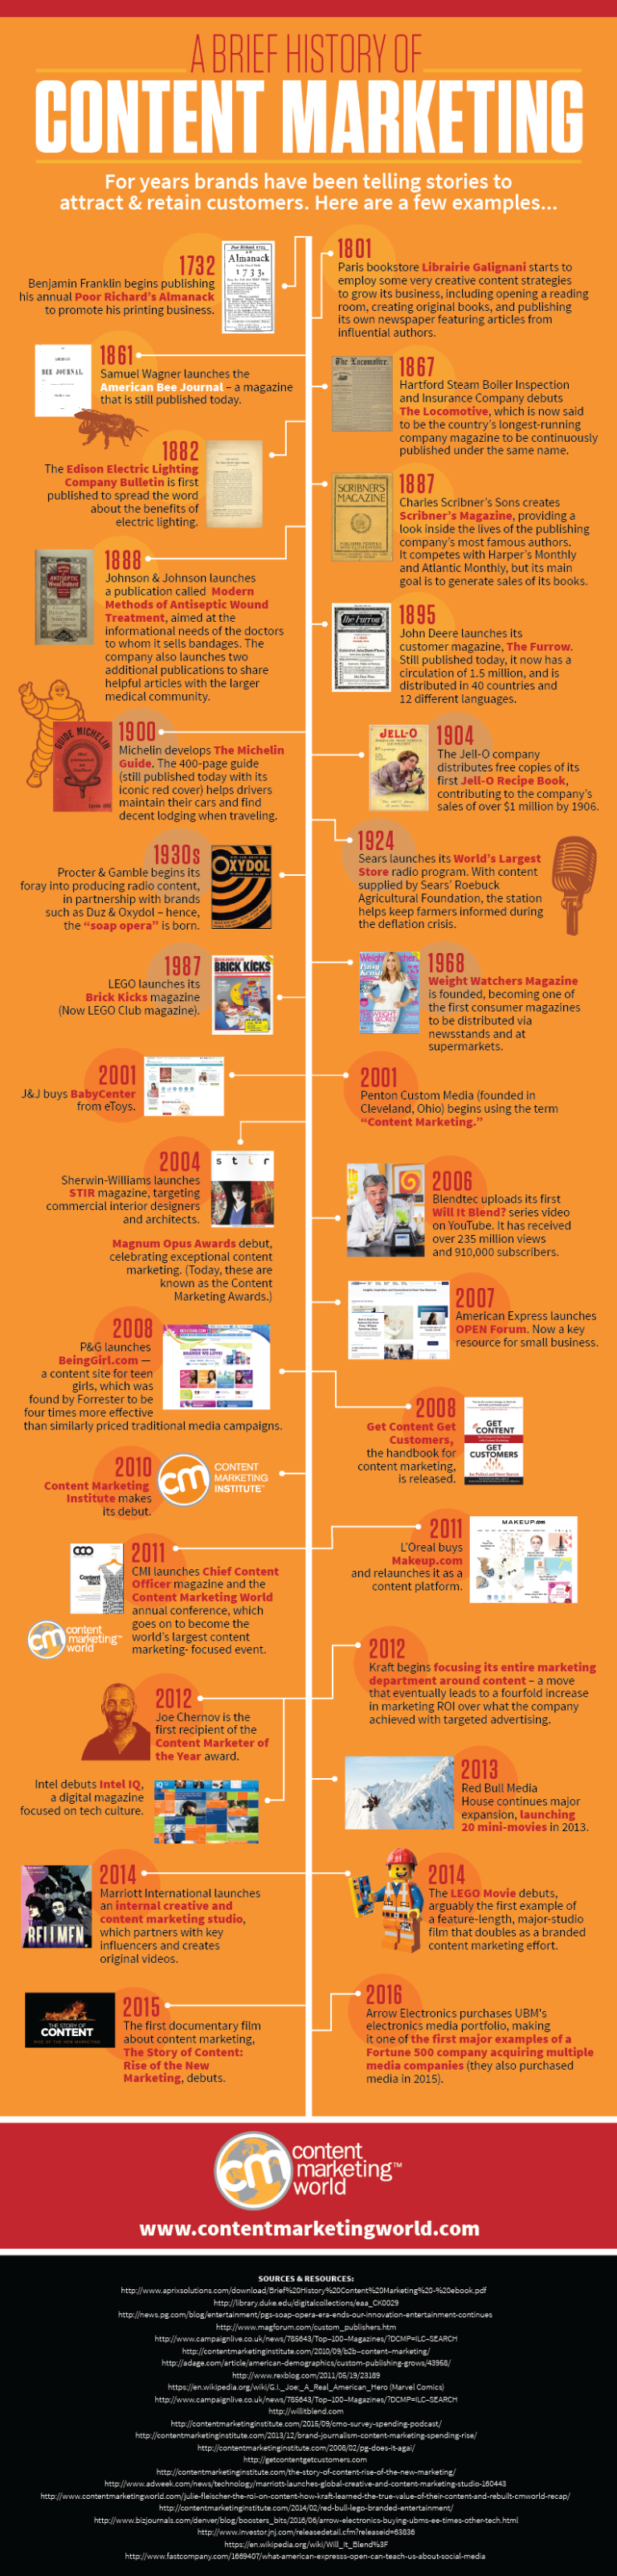 Content Marketing Isn T A New Thing Http Contentmarketinginstitute Com 2016 07 History C Infographic Marketing Content Marketing Institute Content Marketing